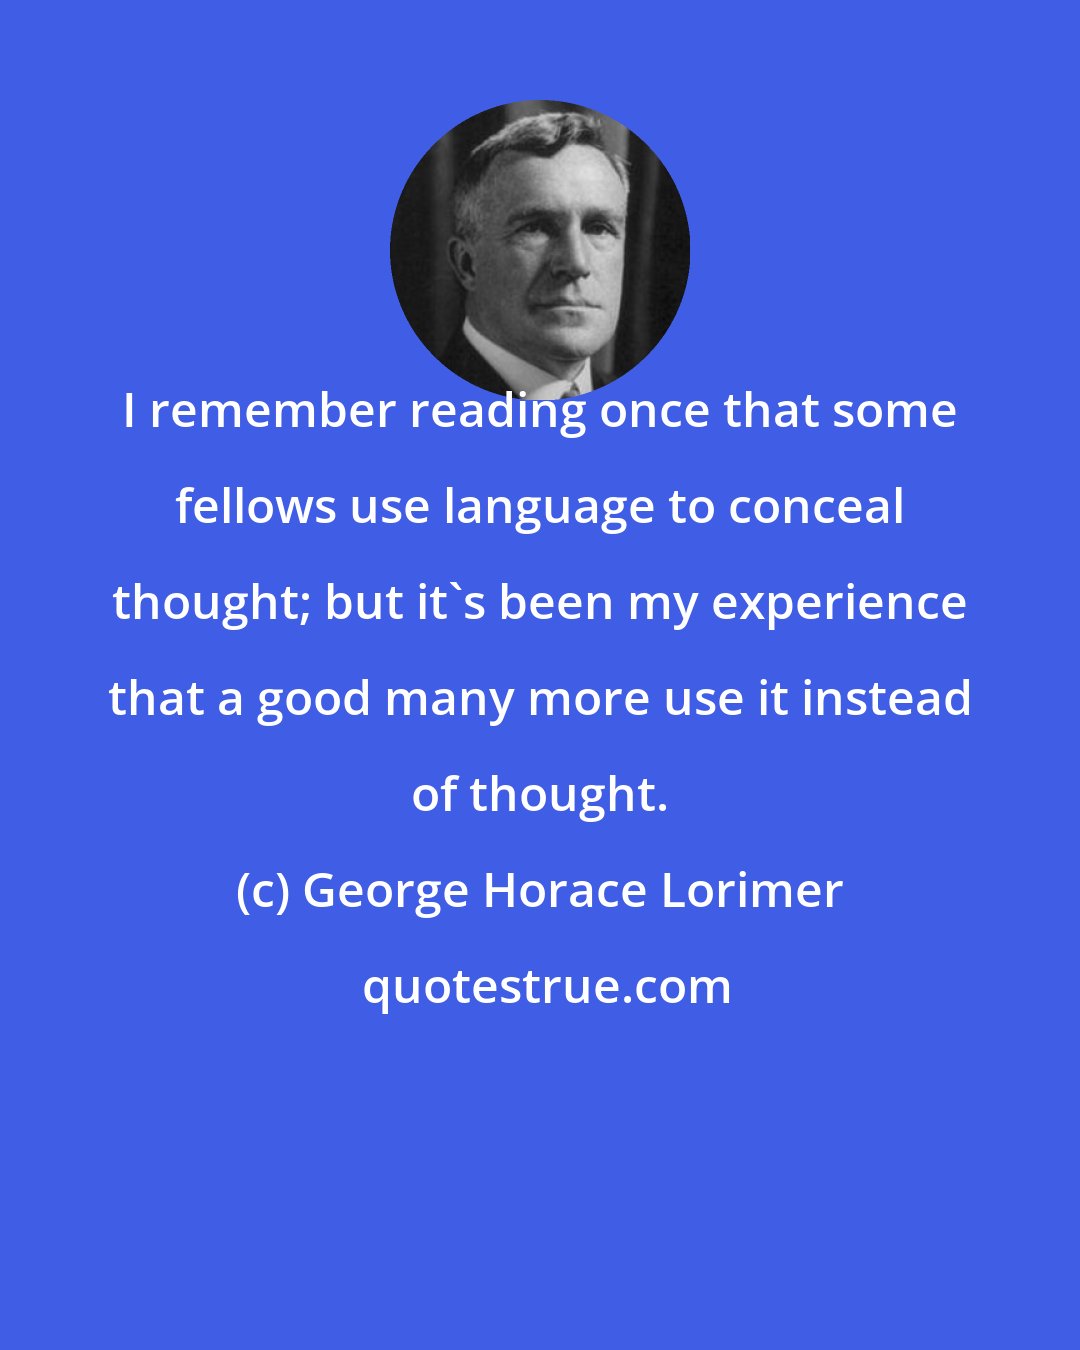 George Horace Lorimer: I remember reading once that some fellows use language to conceal thought; but it's been my experience that a good many more use it instead of thought.